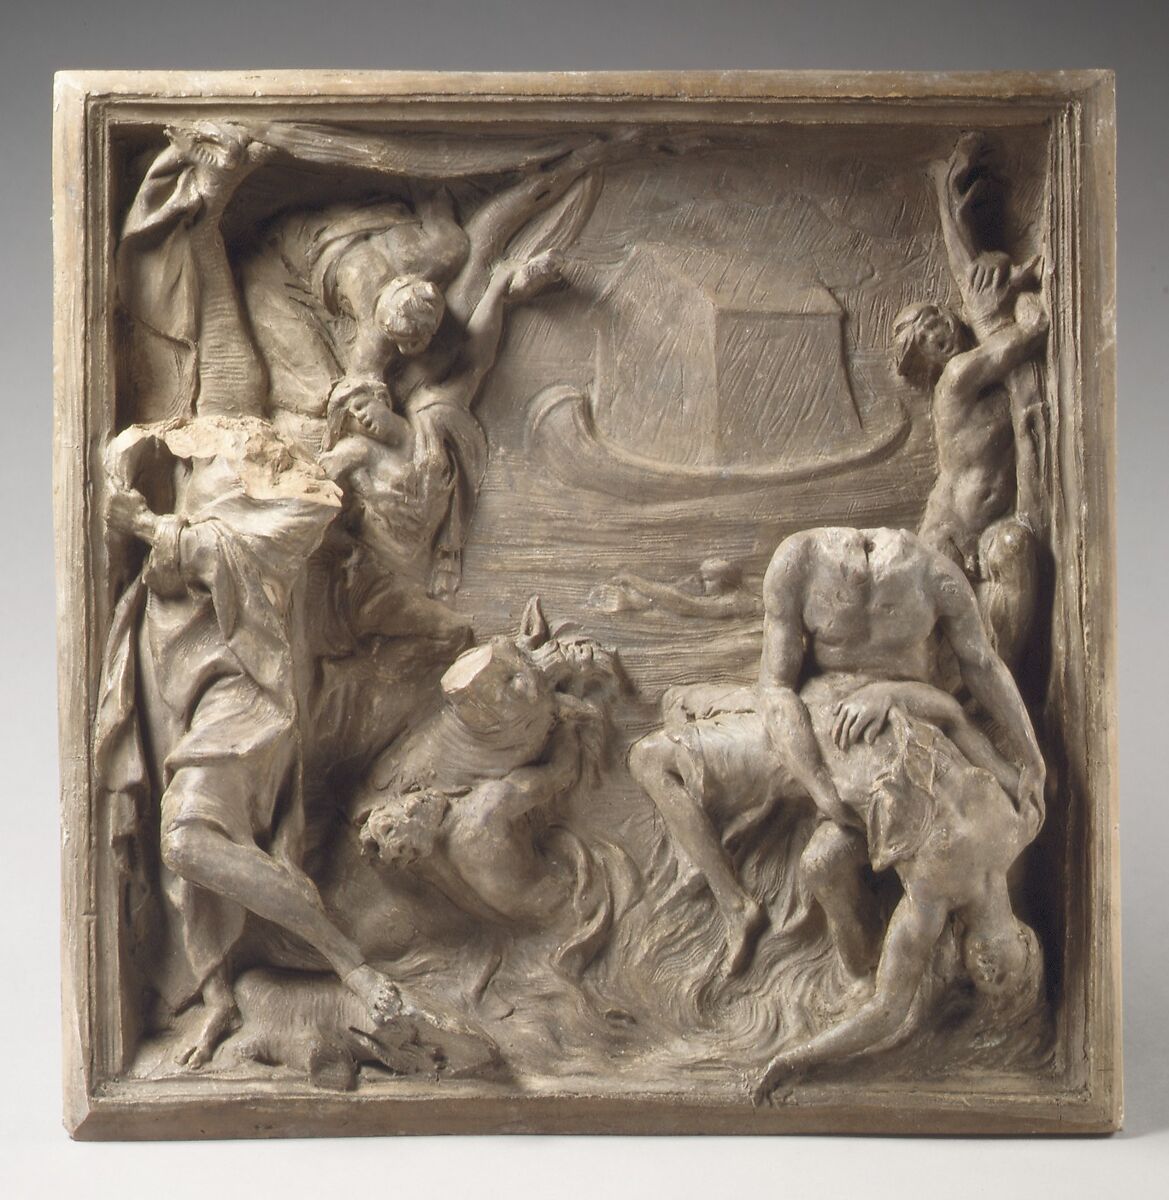 The Flood, Michel Anguier (French, Eu (Seine-Maritime) 1612–1686 Paris), Terracotta, French, modeled Italy, Rome 